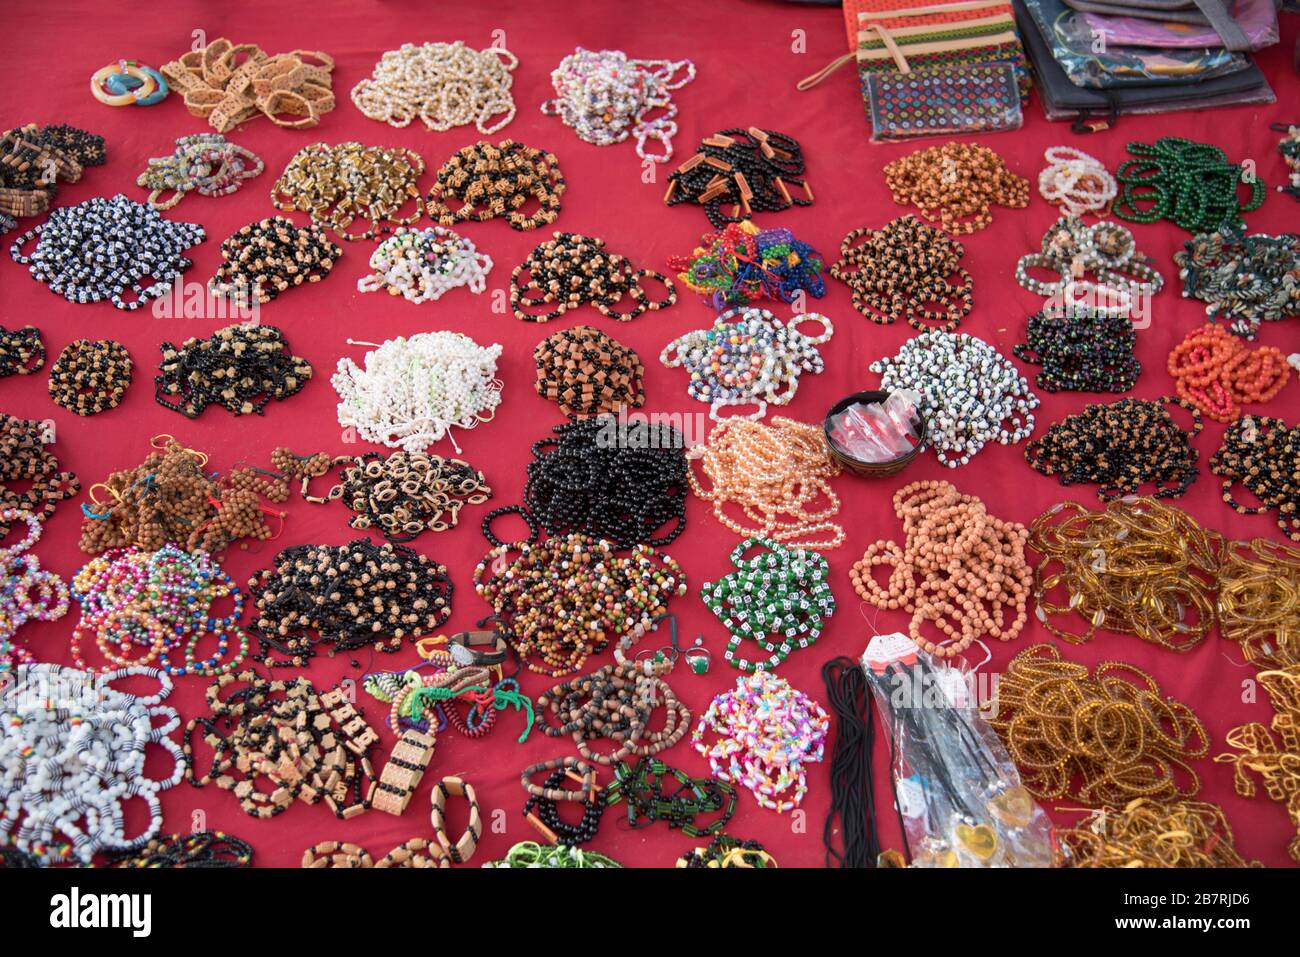 Myanmar: Bagan- Different types of bead garlands and bracelets locally made being sold in the vicinity of Dhamayan Gyi Temple, A.D. 1163-1163. Stock Photo